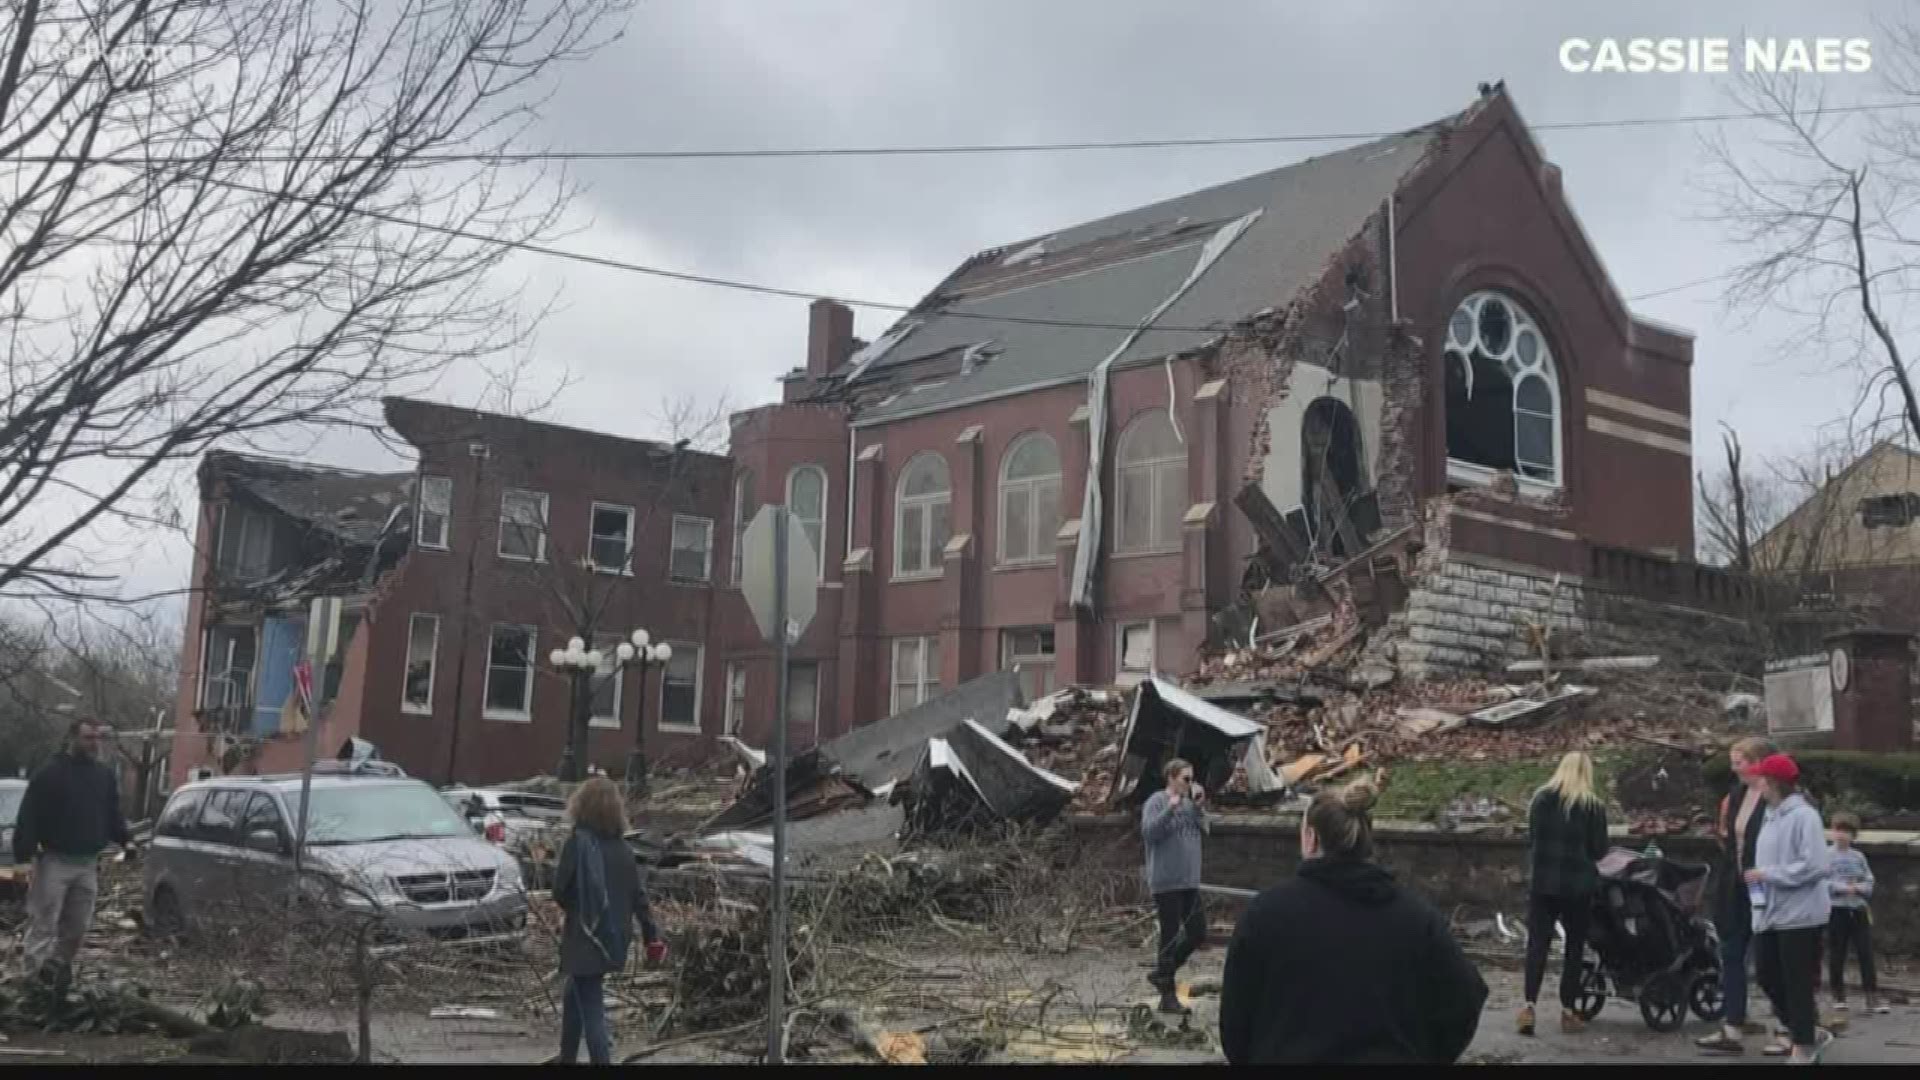 St. Louis natives who now live in Nashville are sharing their stories of survival after deadly tornadoes tore through Tennessee.